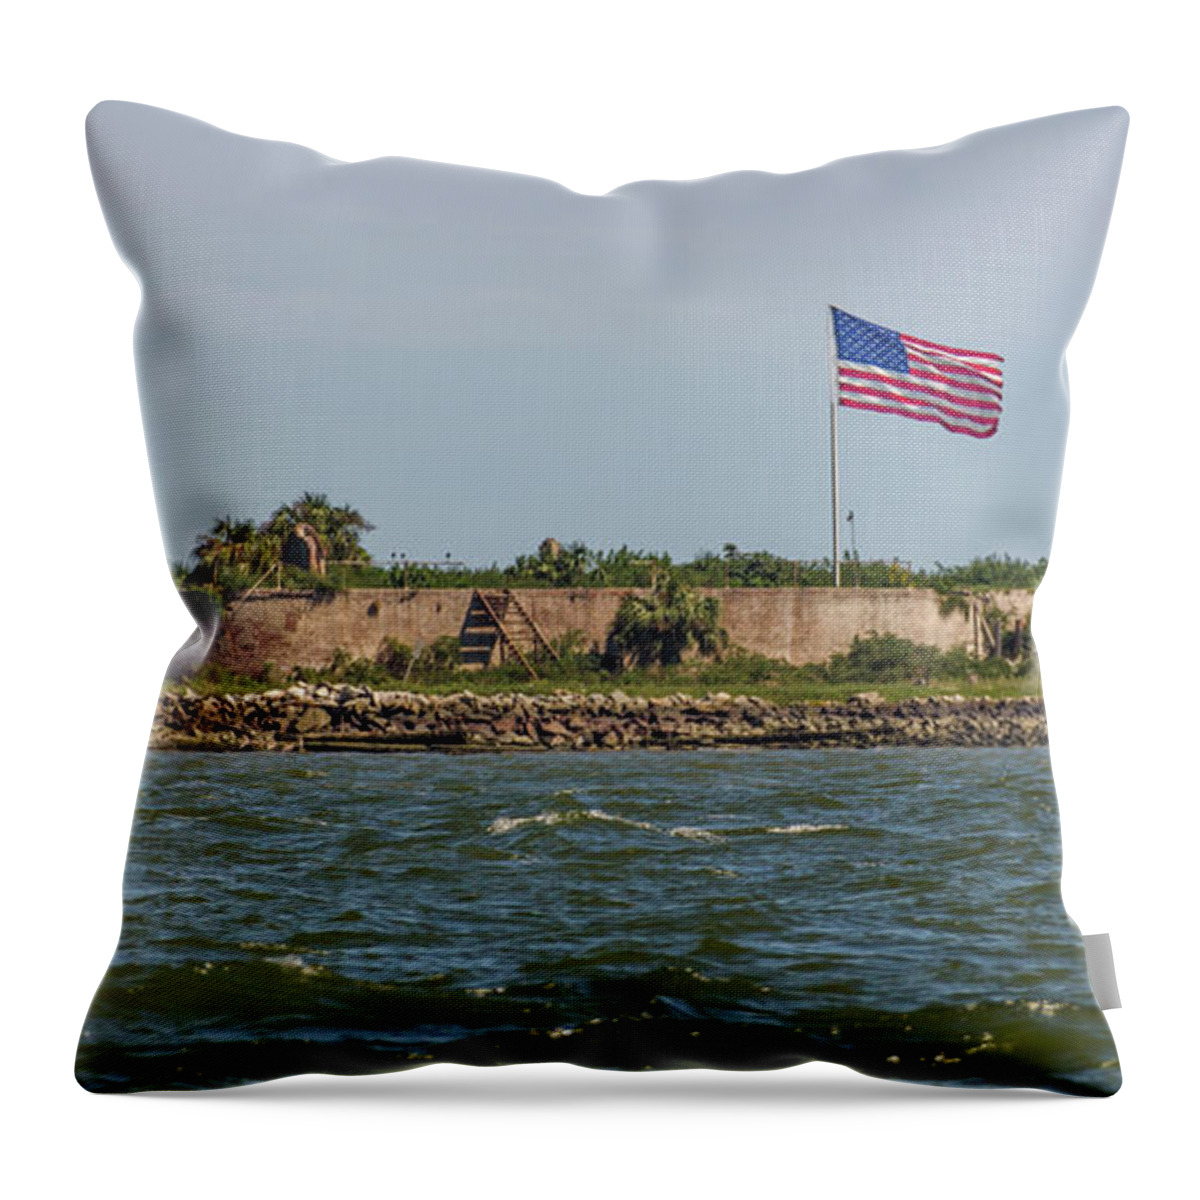 Castle Pinckney Throw Pillow featuring the photograph Historical American Civil War - Castle Pinckney by Dale Powell